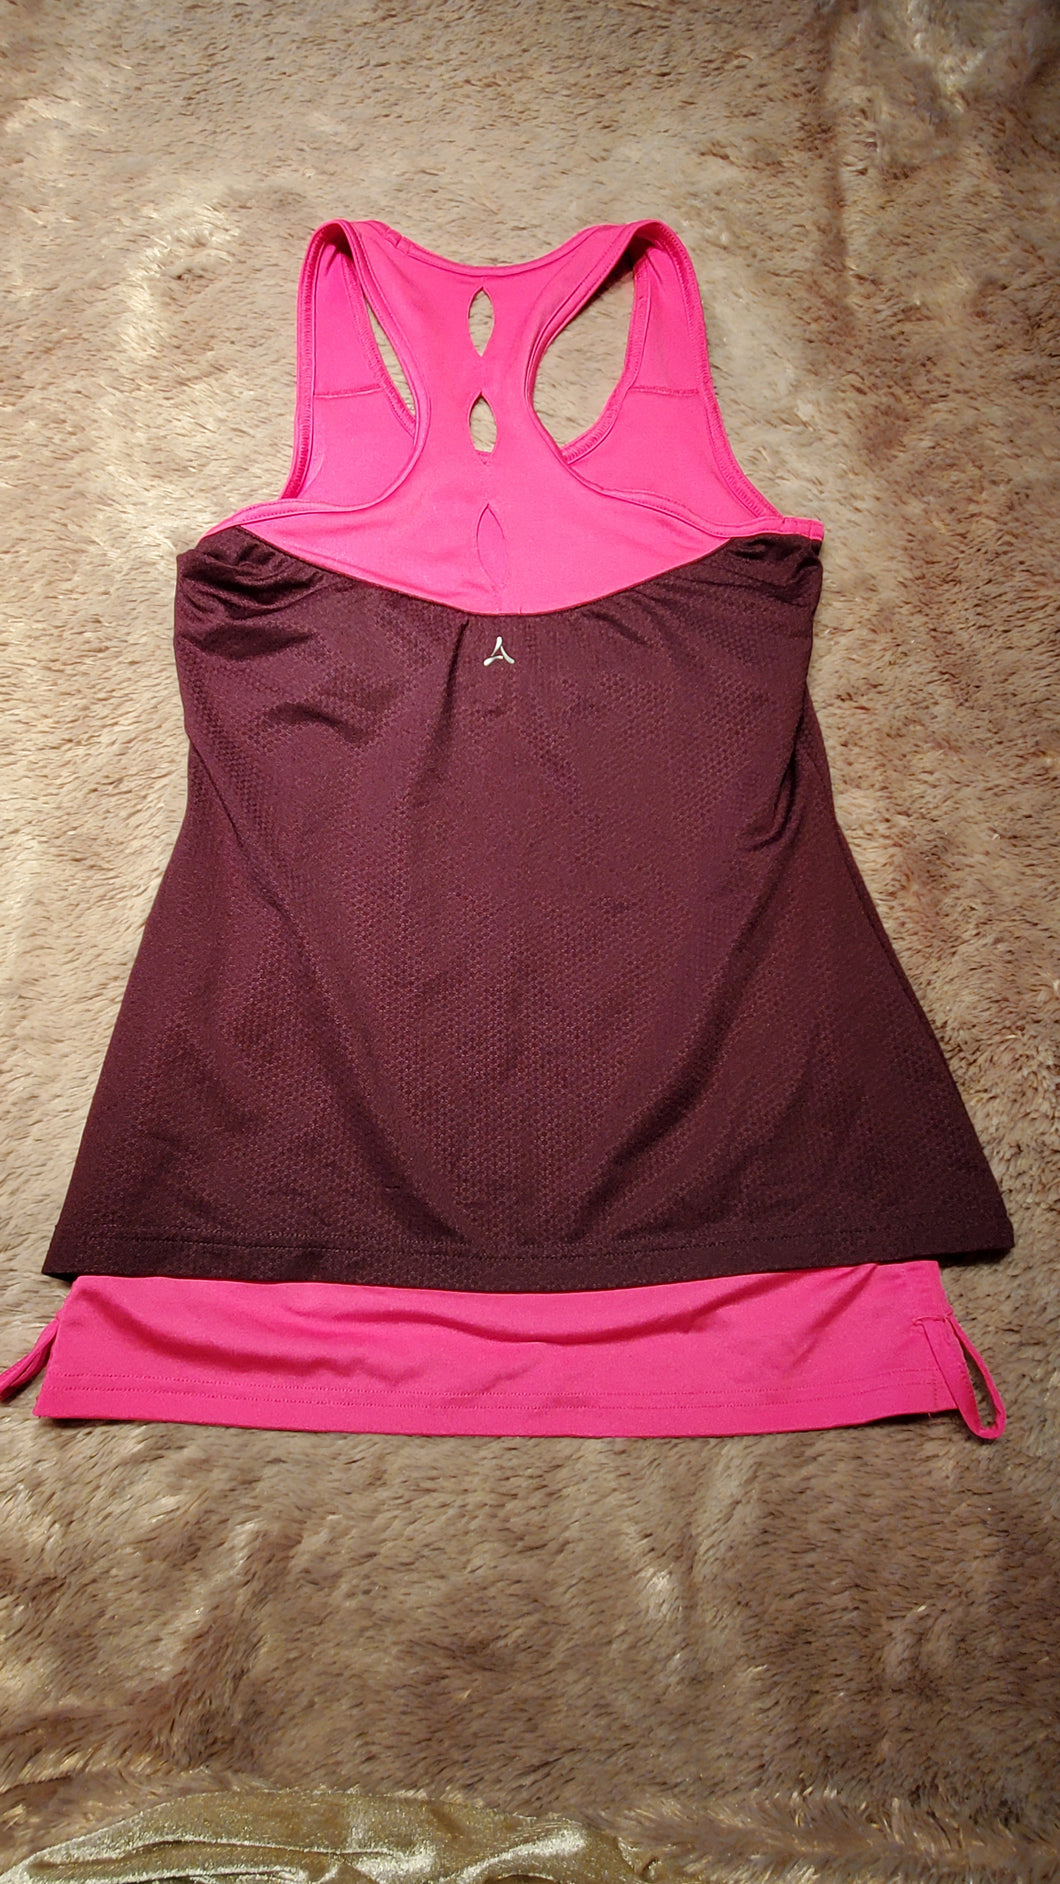 Aspire tank top, size small, dual layer, burgundy, pink Adult Small